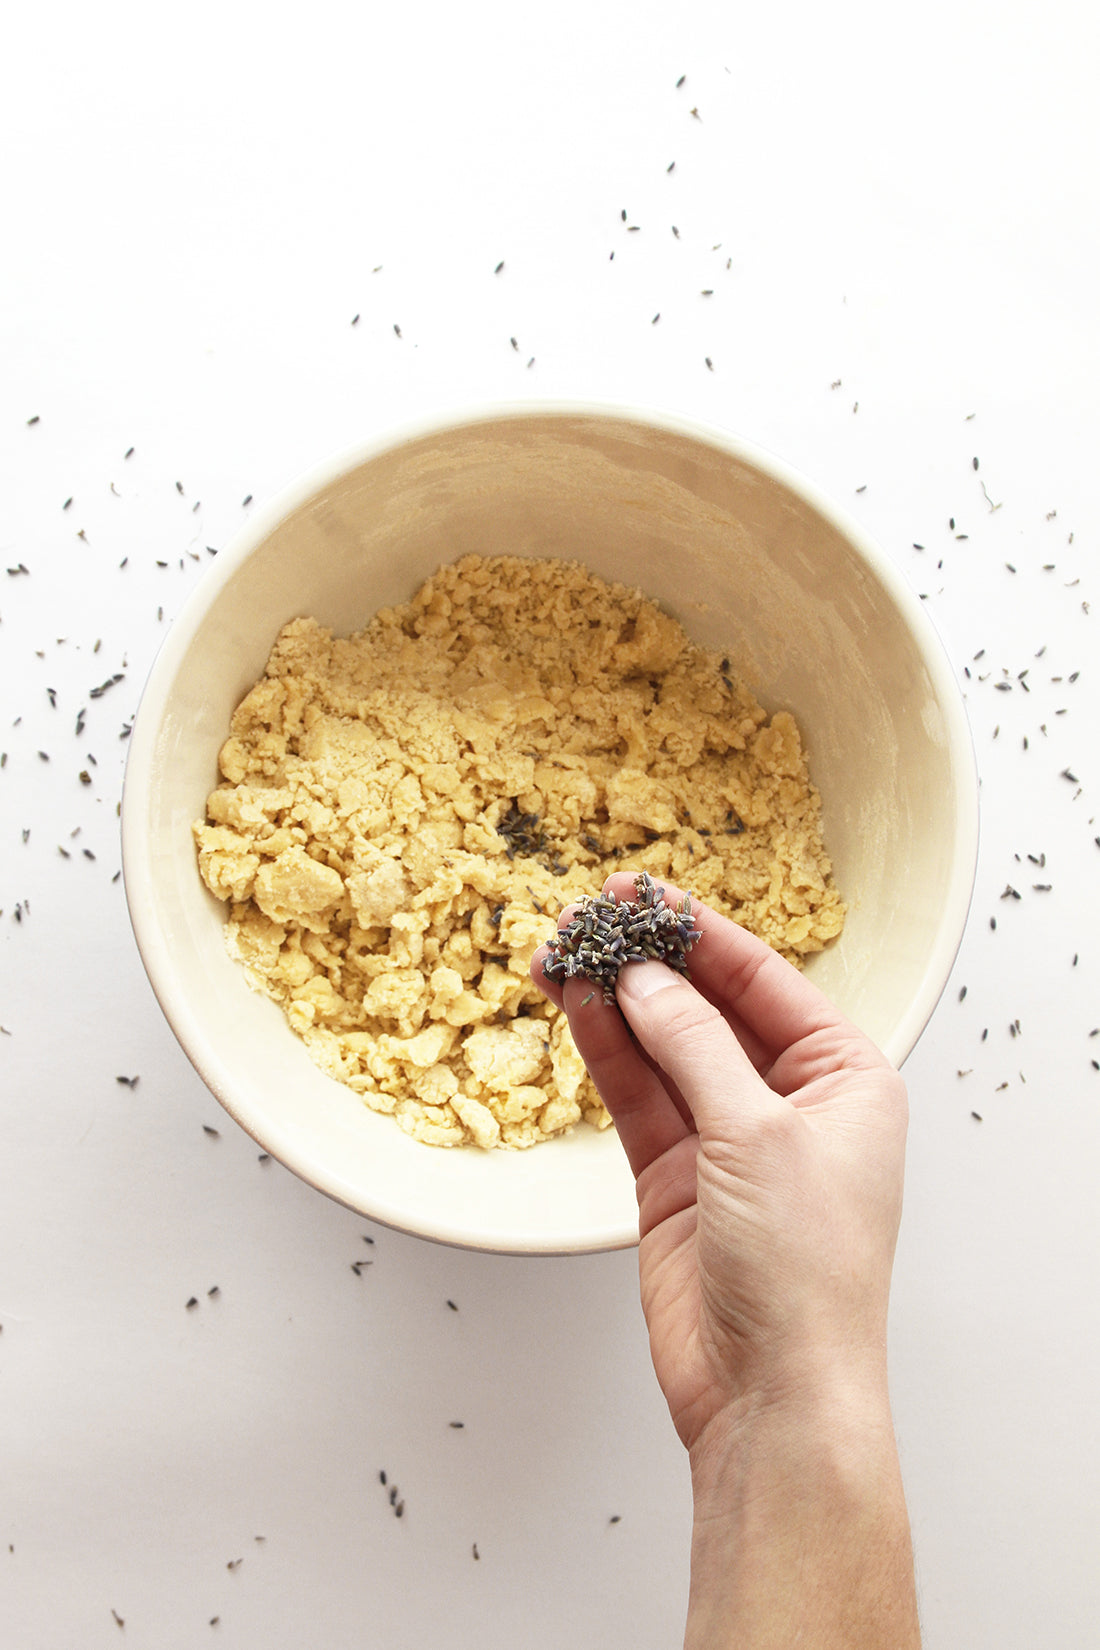 Image of a hand putting lavender into bowl with crust crumbs for Miss Jones Baking Co Lavender Lemon Bars recipe